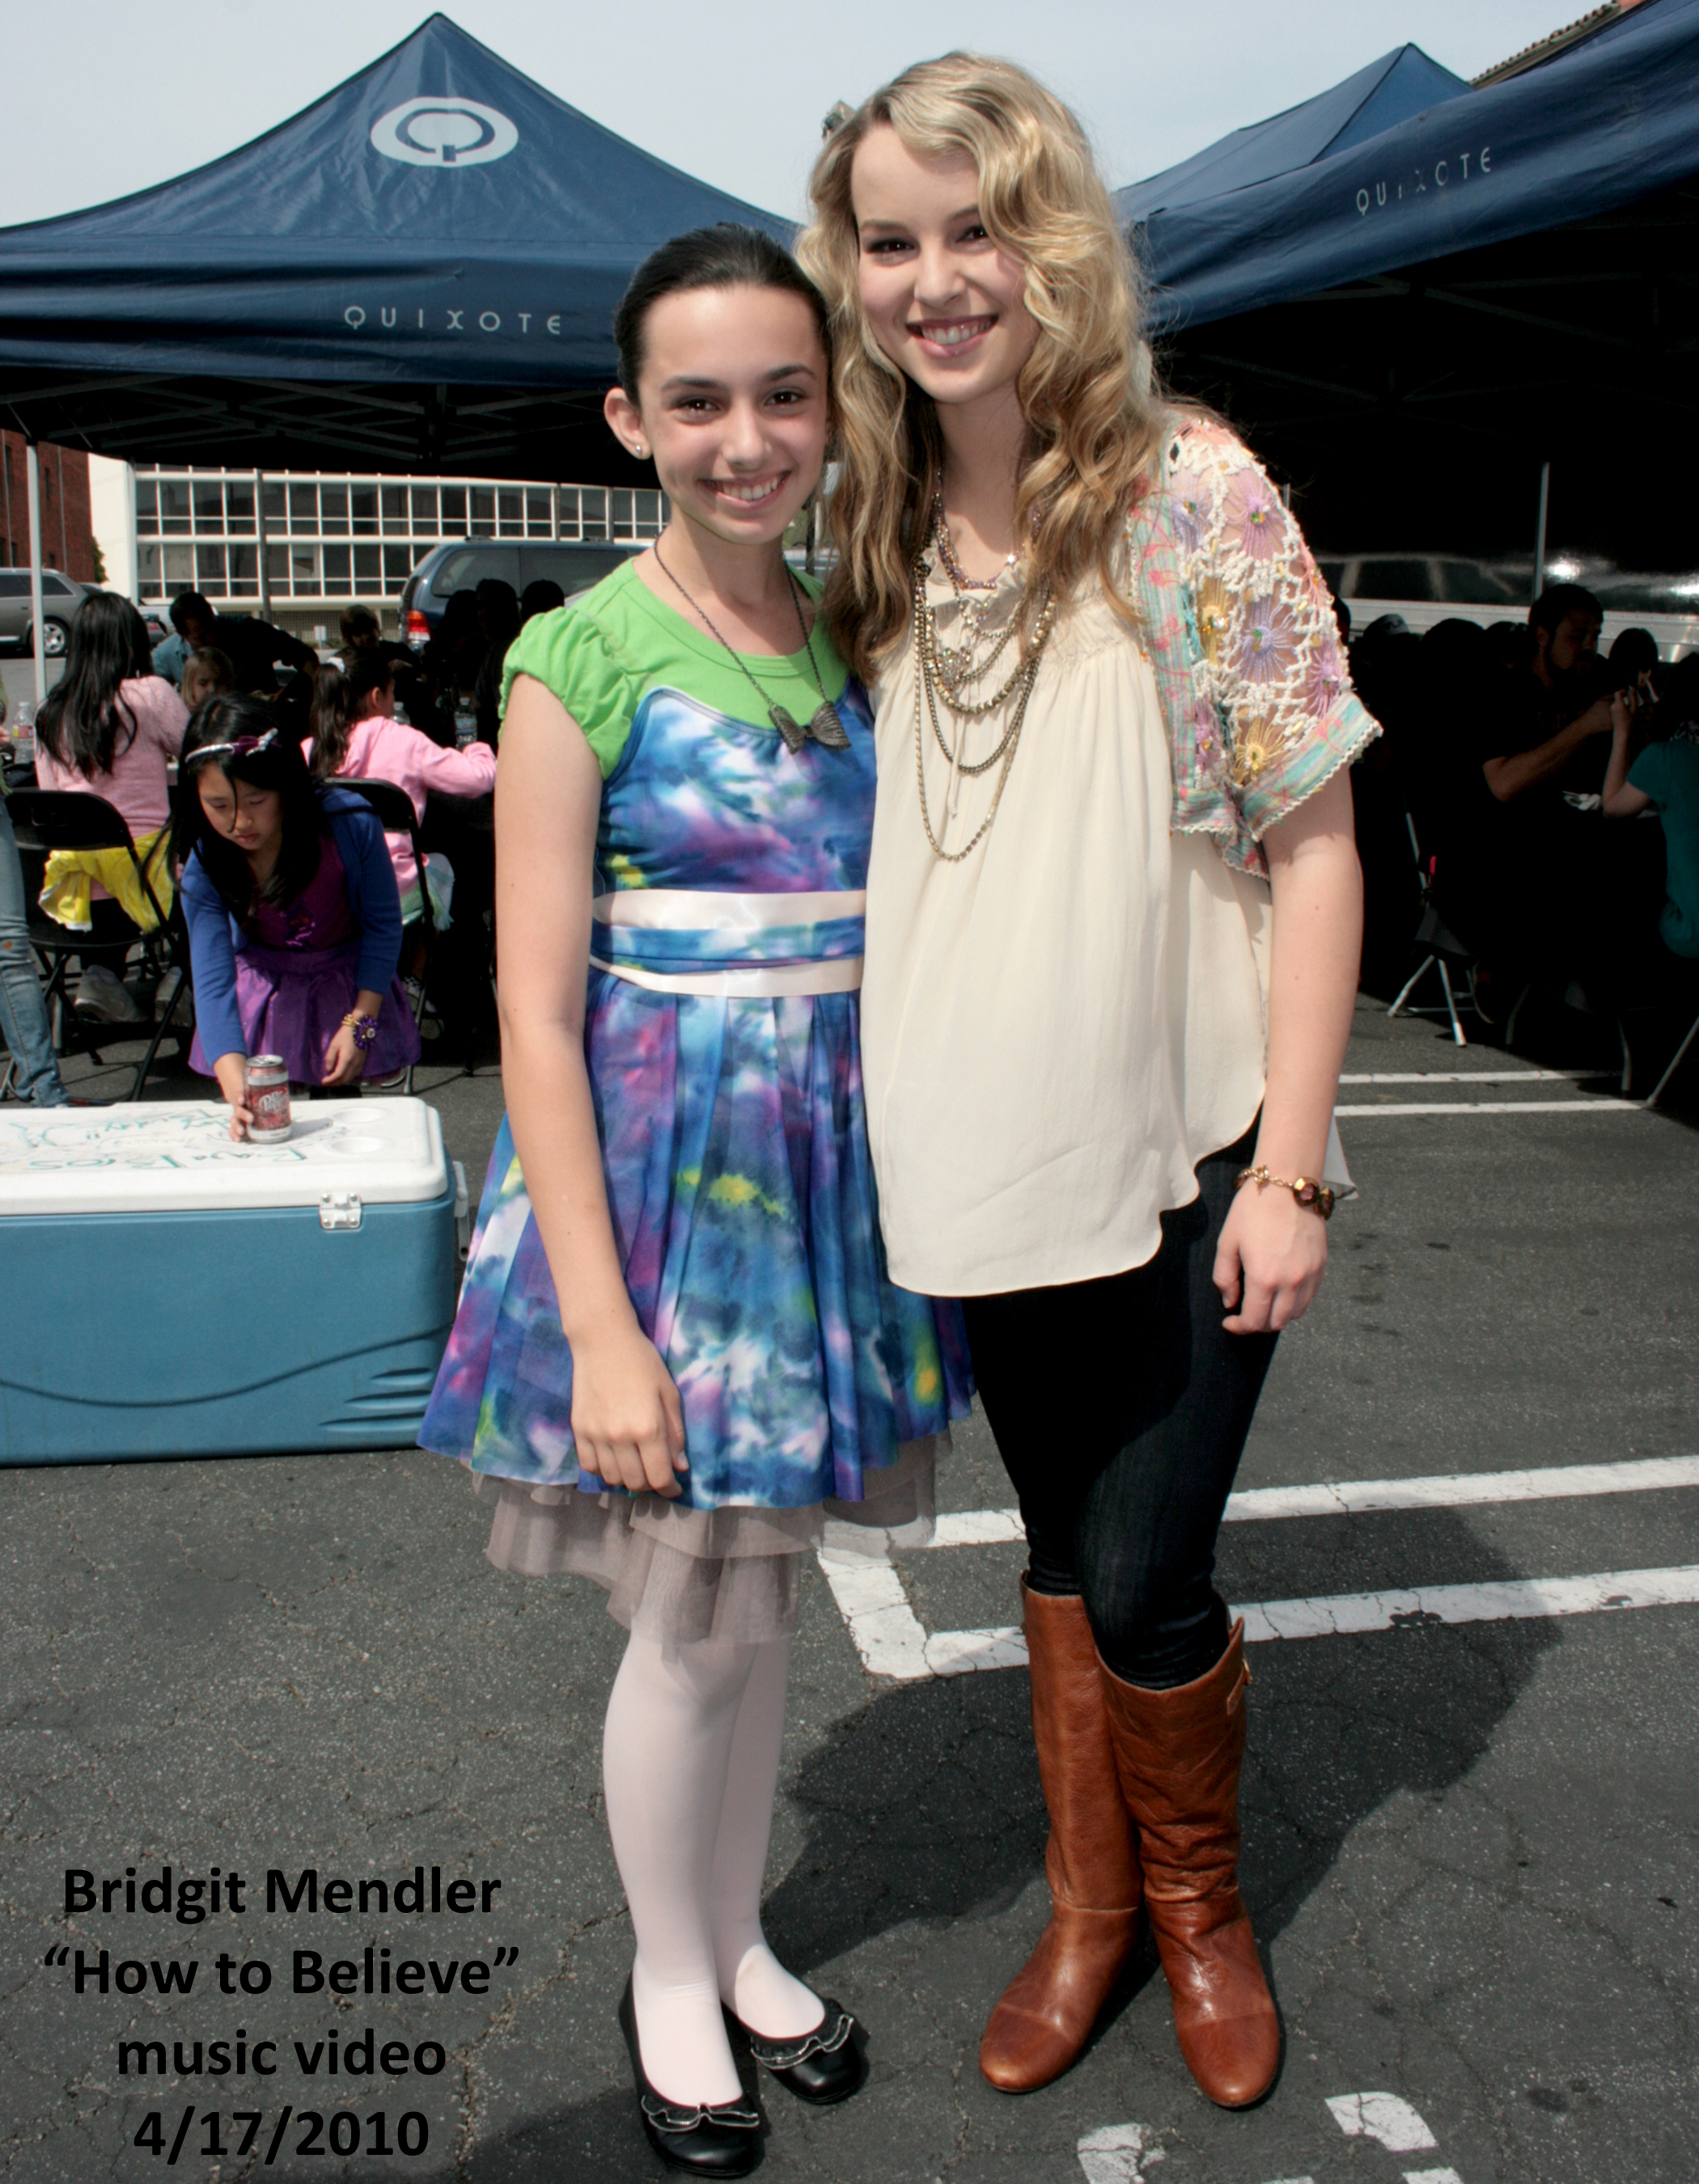 April 2010 with Brigit Mendler durring taping of her music video